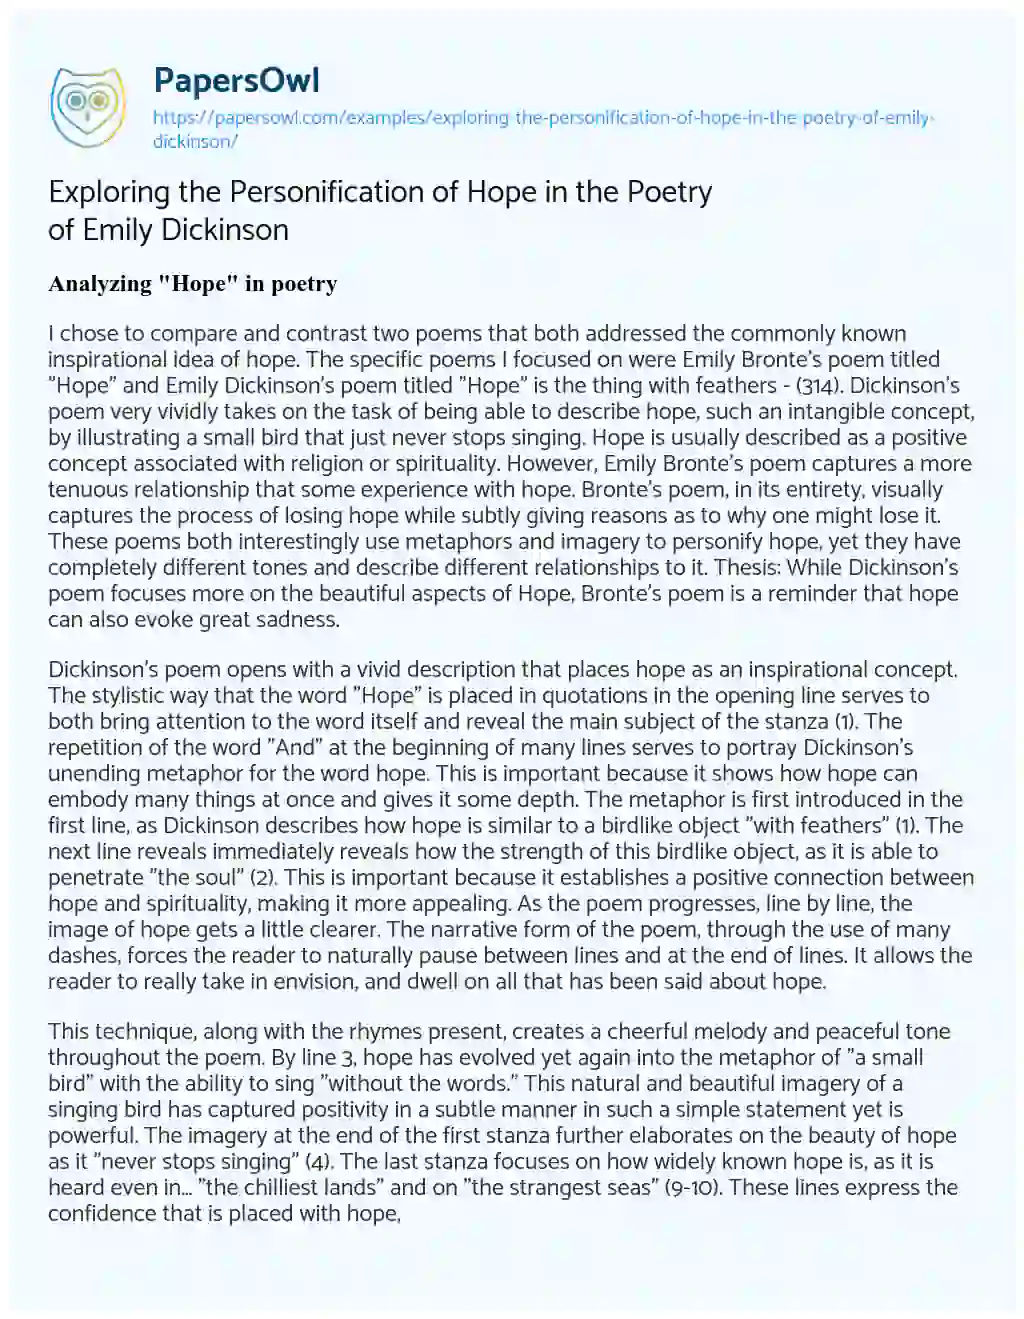 Essay on Exploring the Personification of Hope in the Poetry of Emily Dickinson